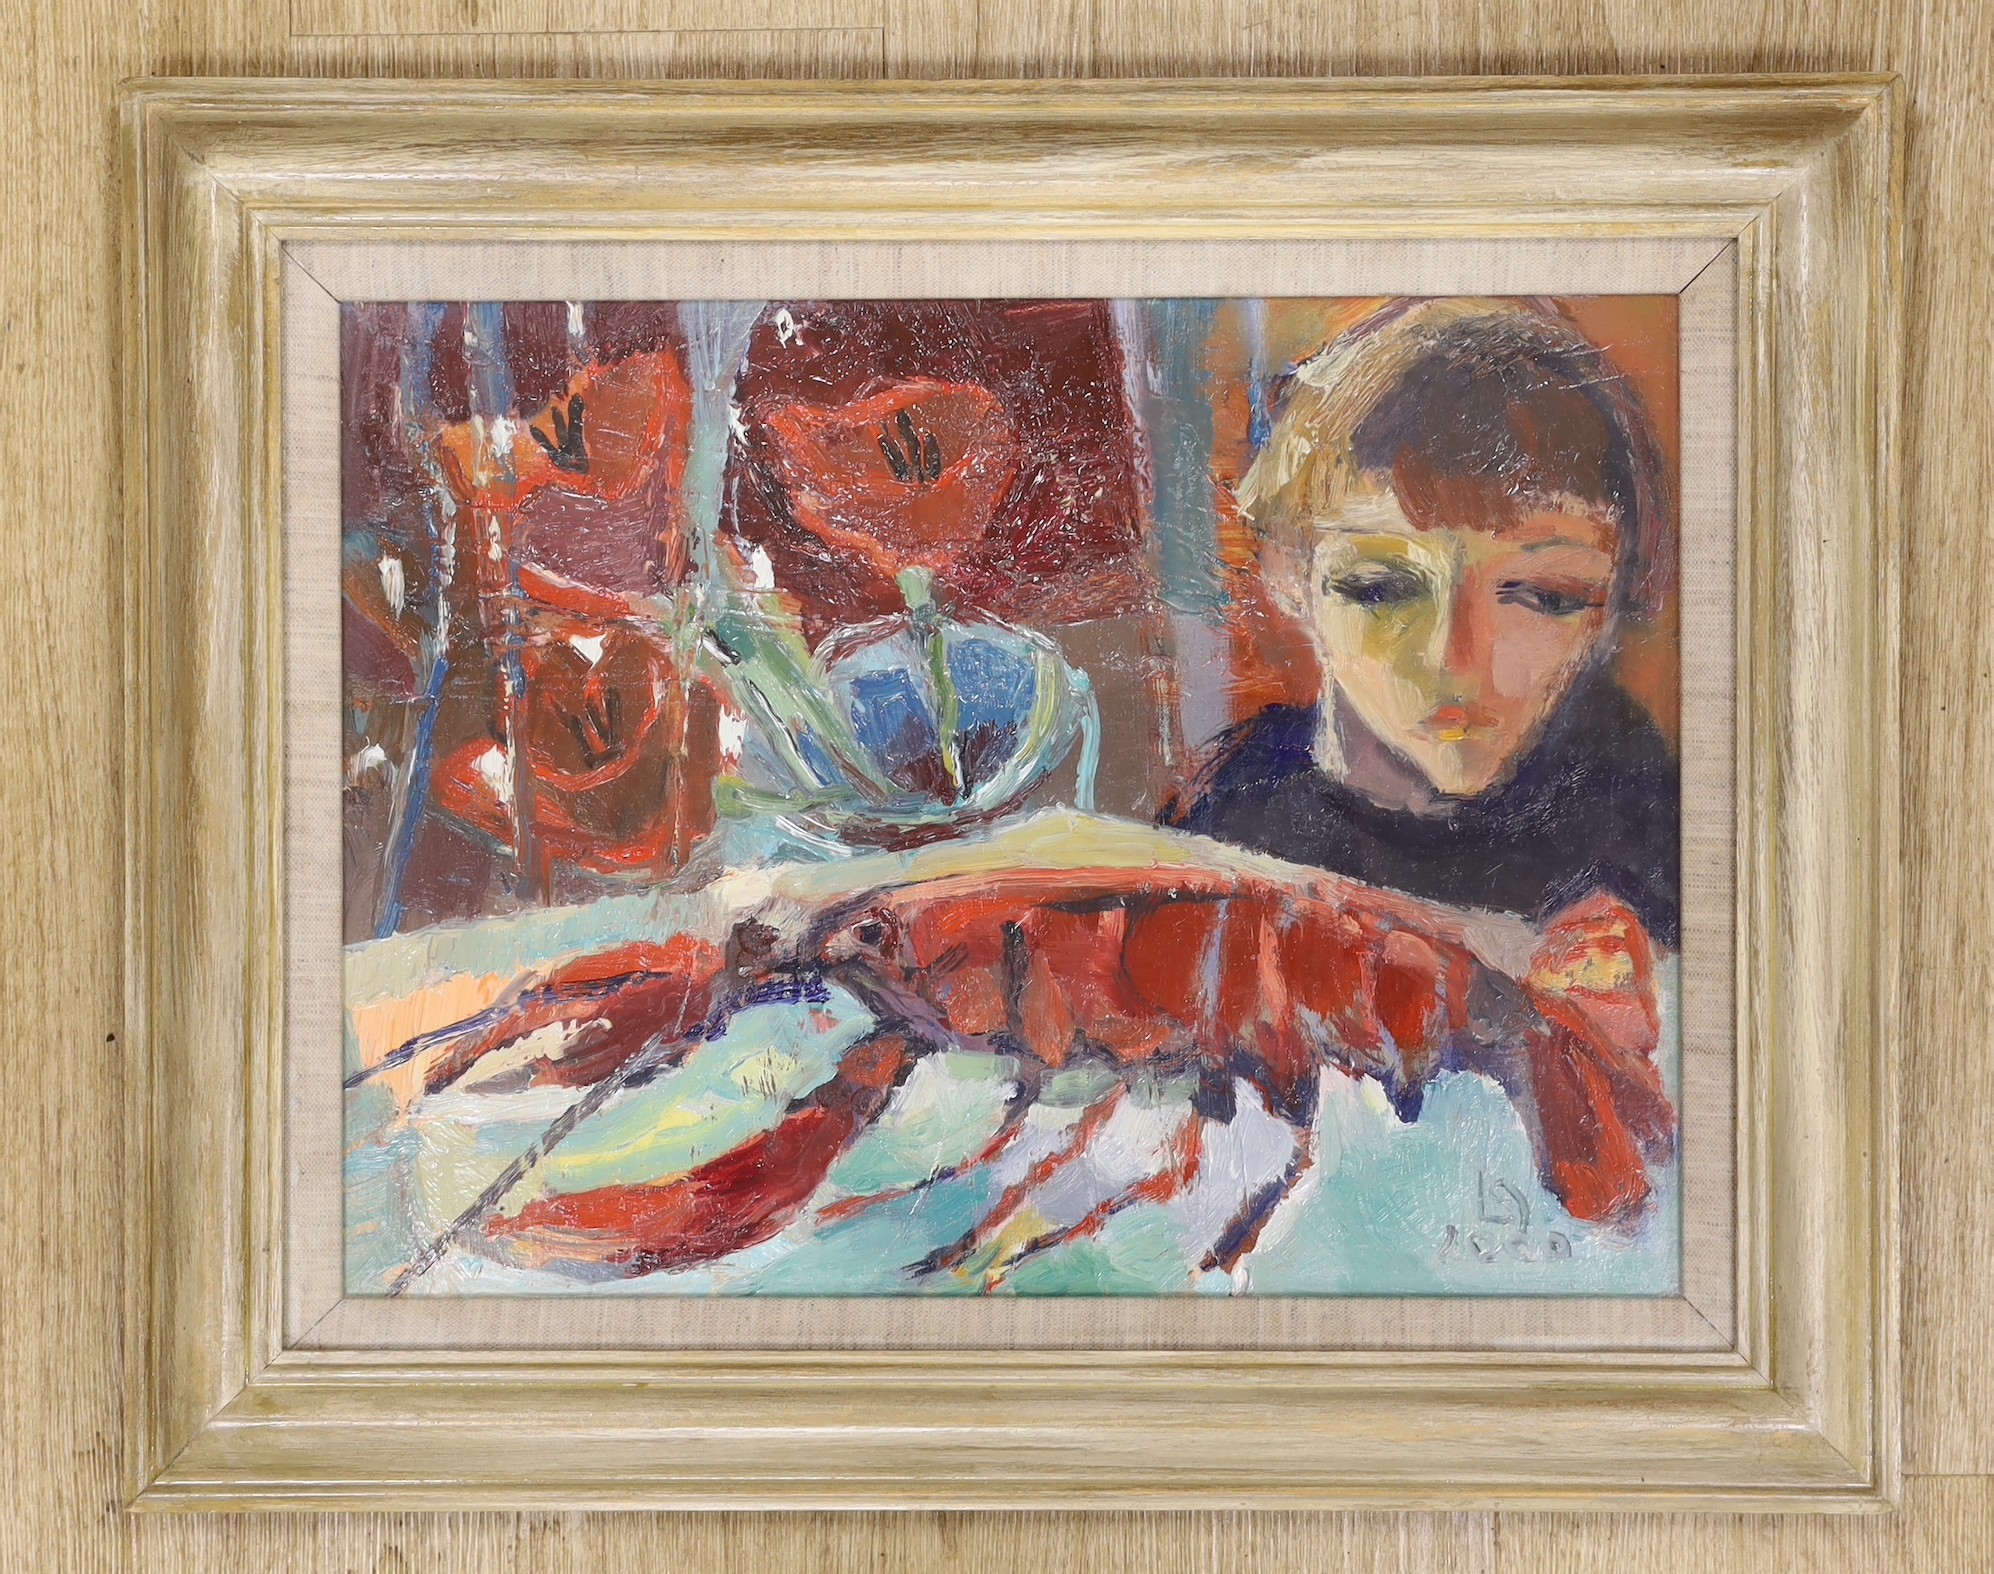 Modern British, oil on canvas, Boy and a lobster, initialled and dated 2000, 30 x 40cm - Image 2 of 3